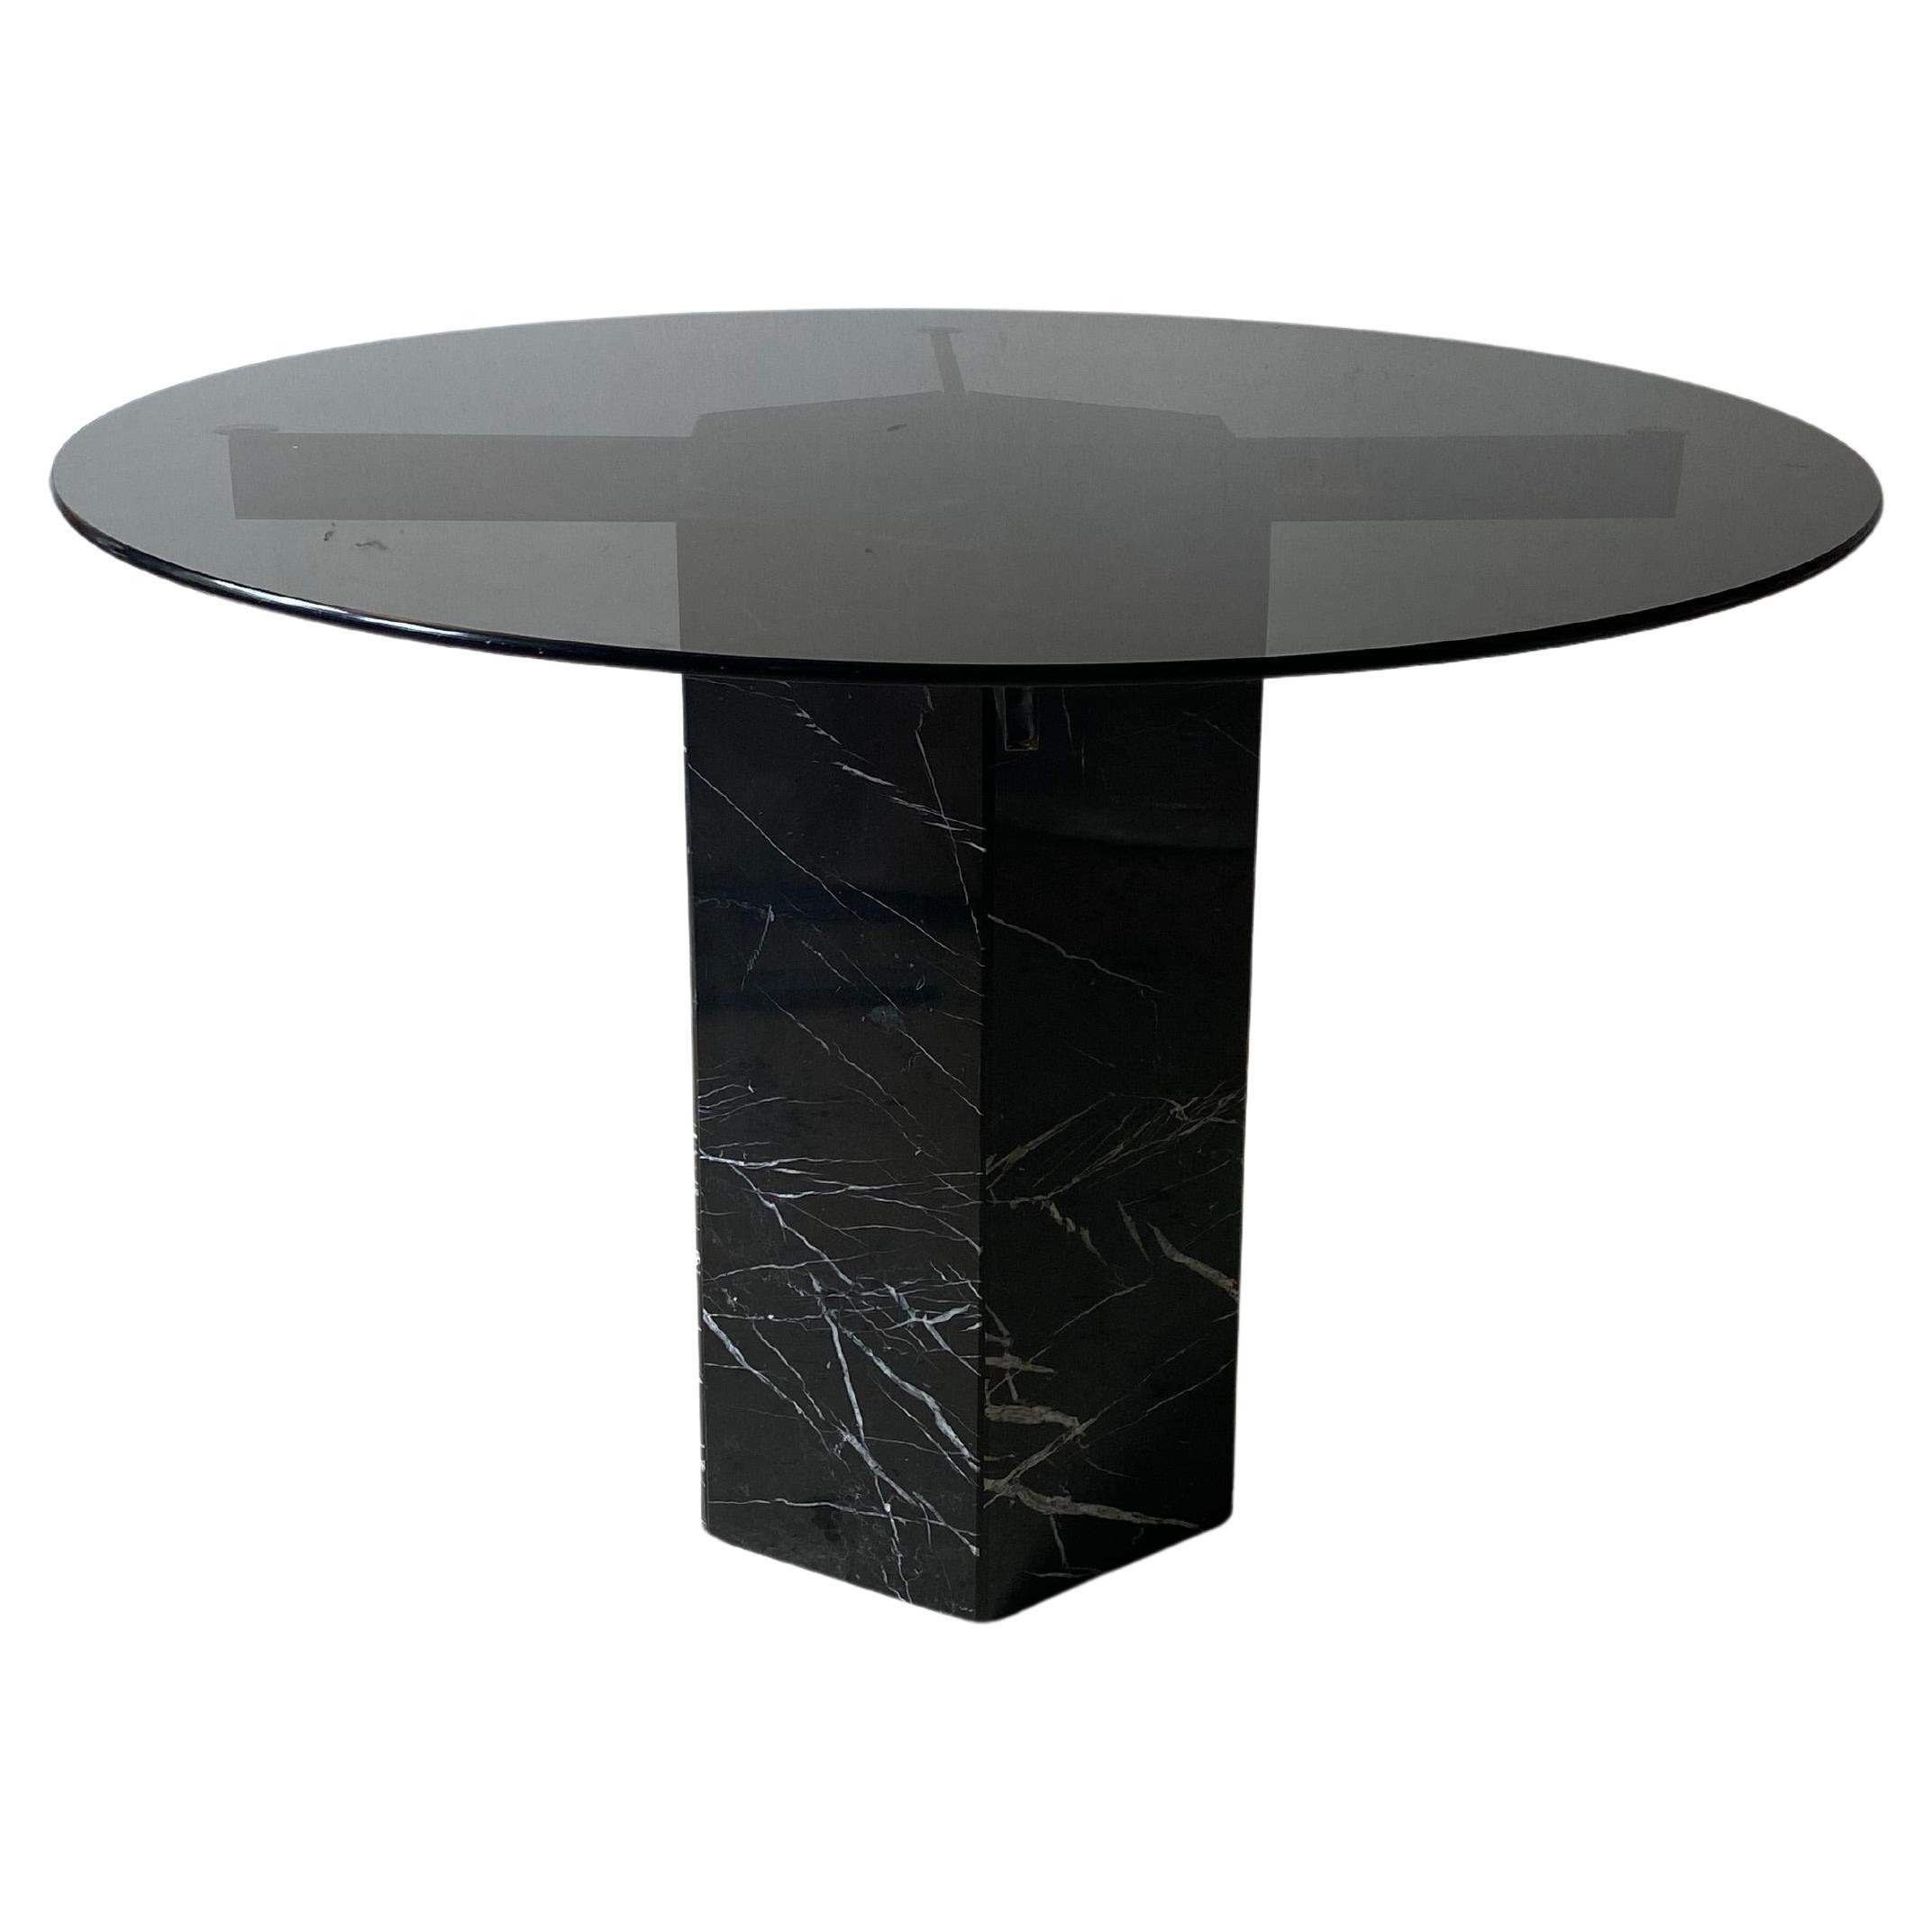 Artedi Black Marble Glass Chrome Round Dining Table MidCentury Modern 1970s 80s  For Sale